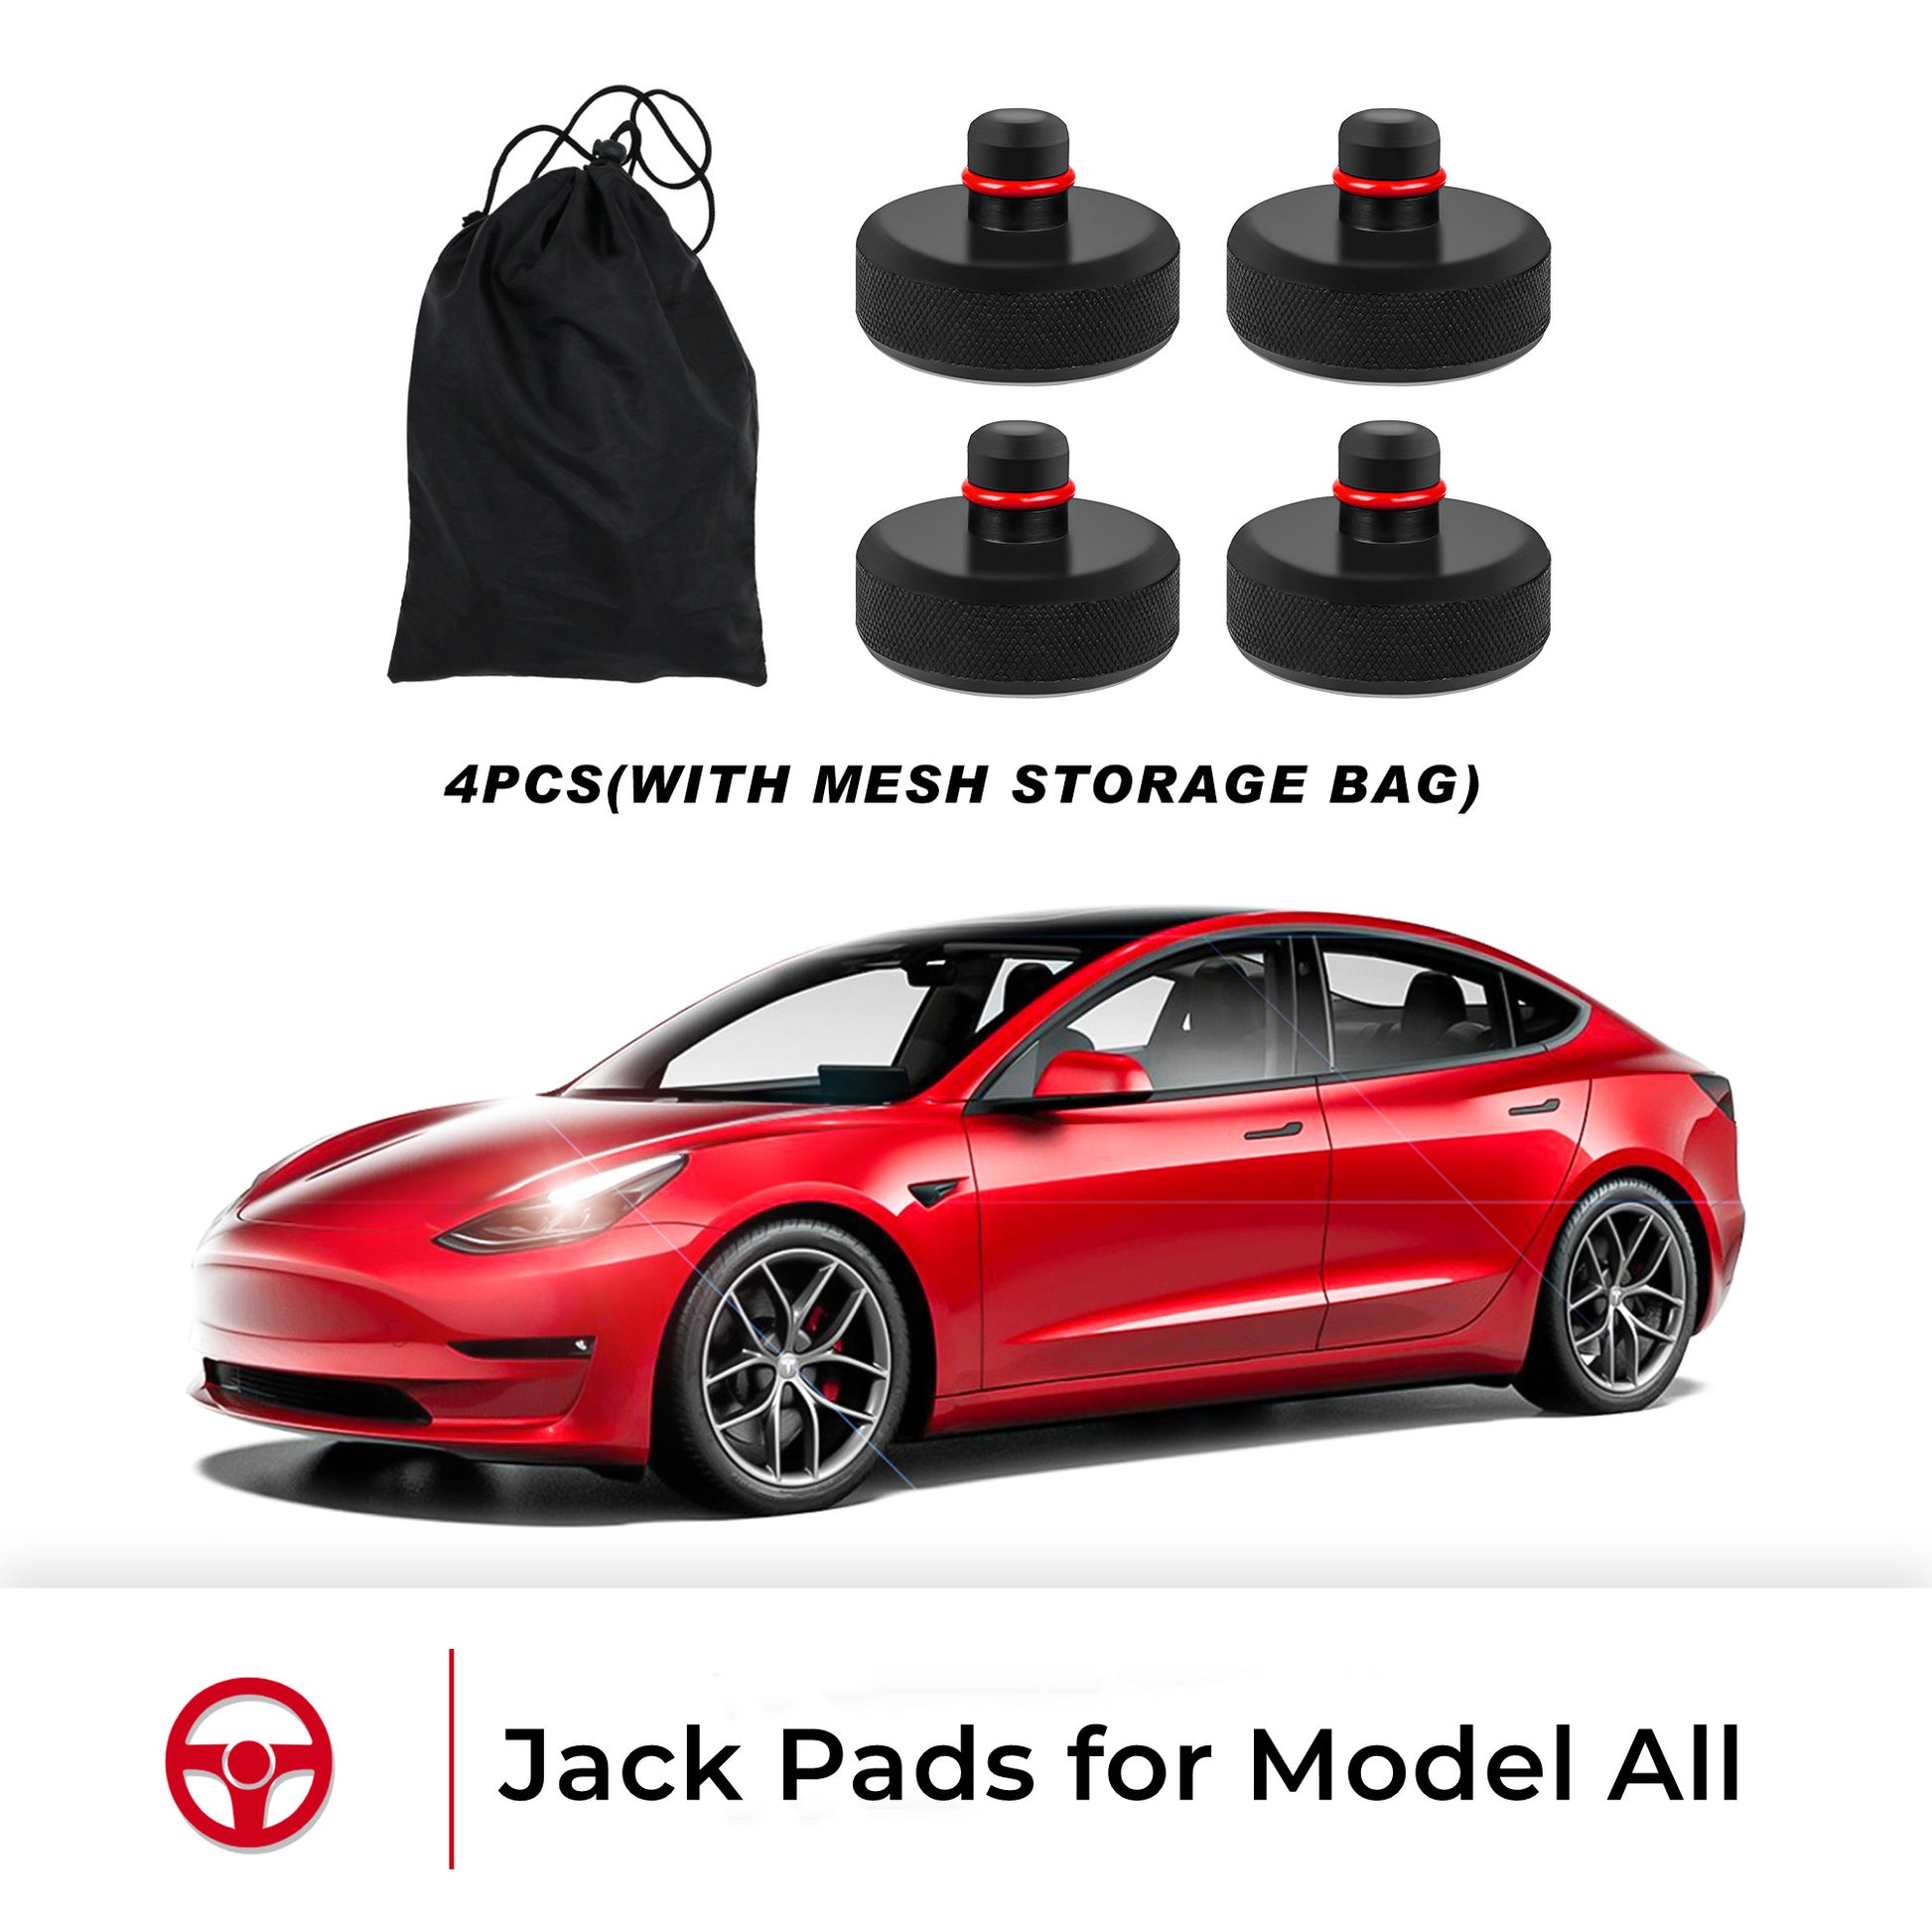 Must-have Tesla accessories – Arcoche